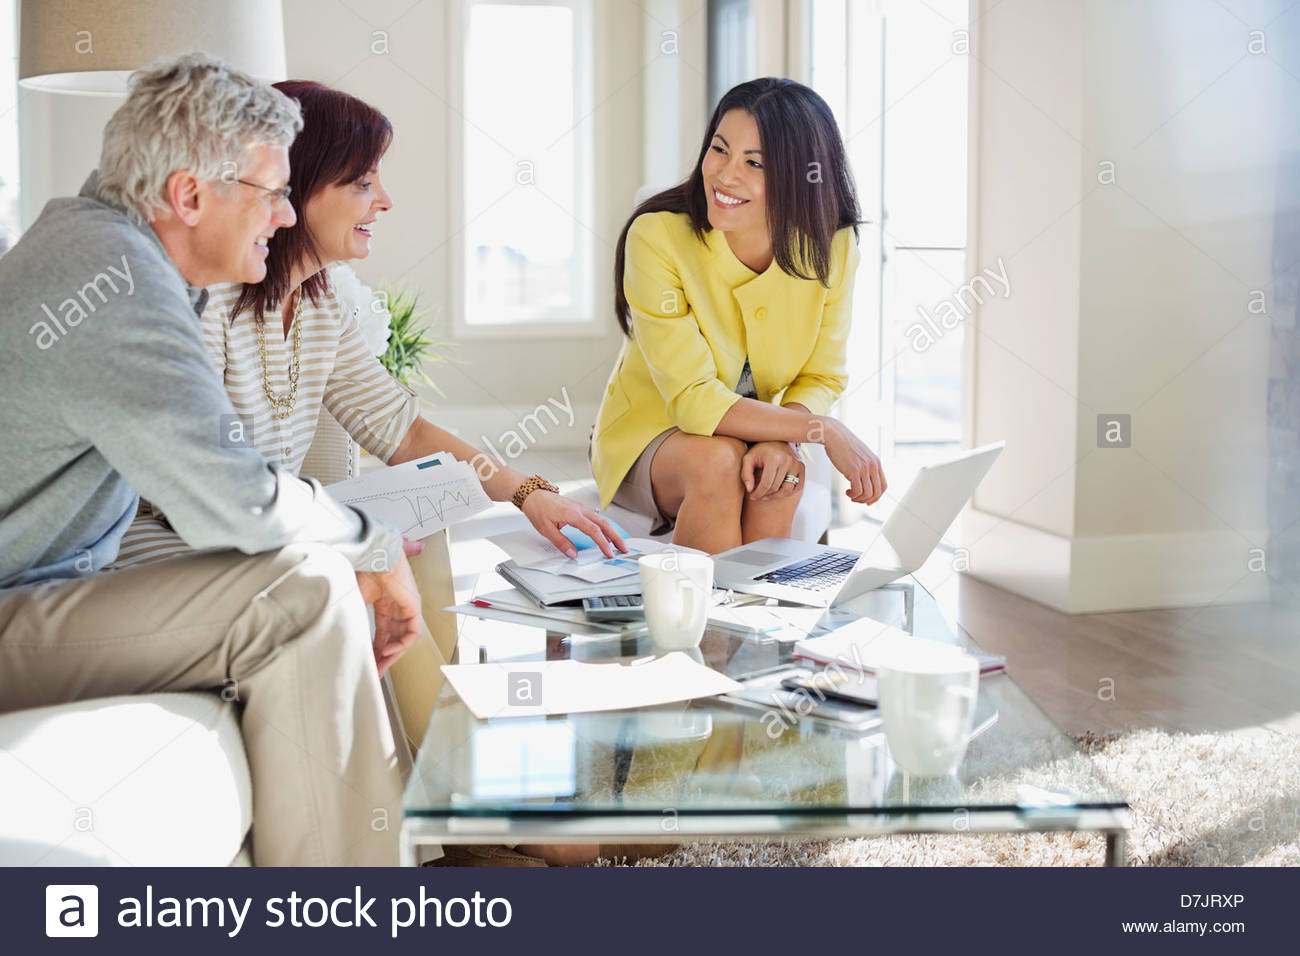 Female Financial Advisor Working With Couple In Home Stock